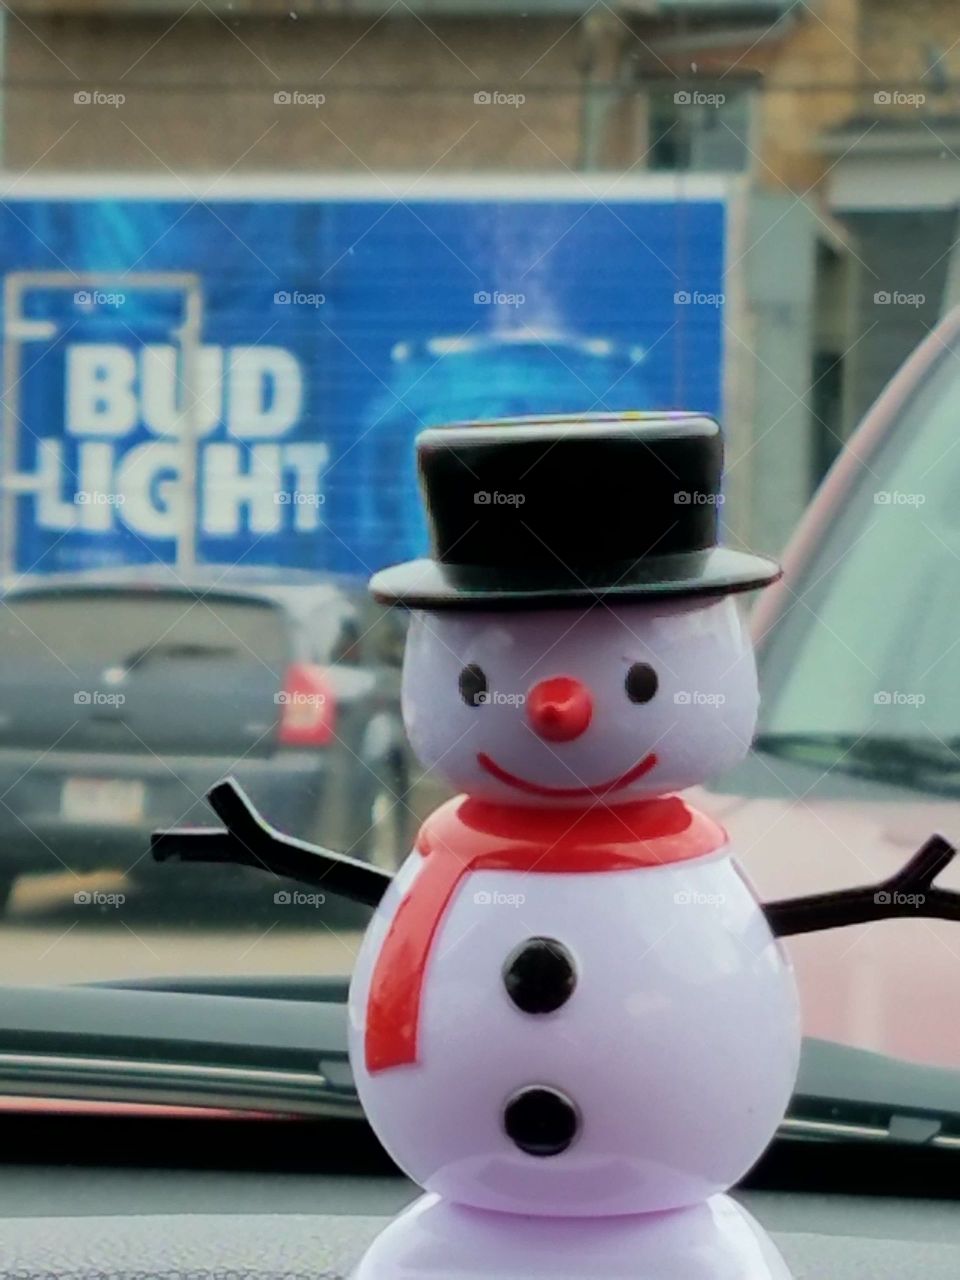 Another day with frosty on our dash. The view sitting in the grocery store parking lot.